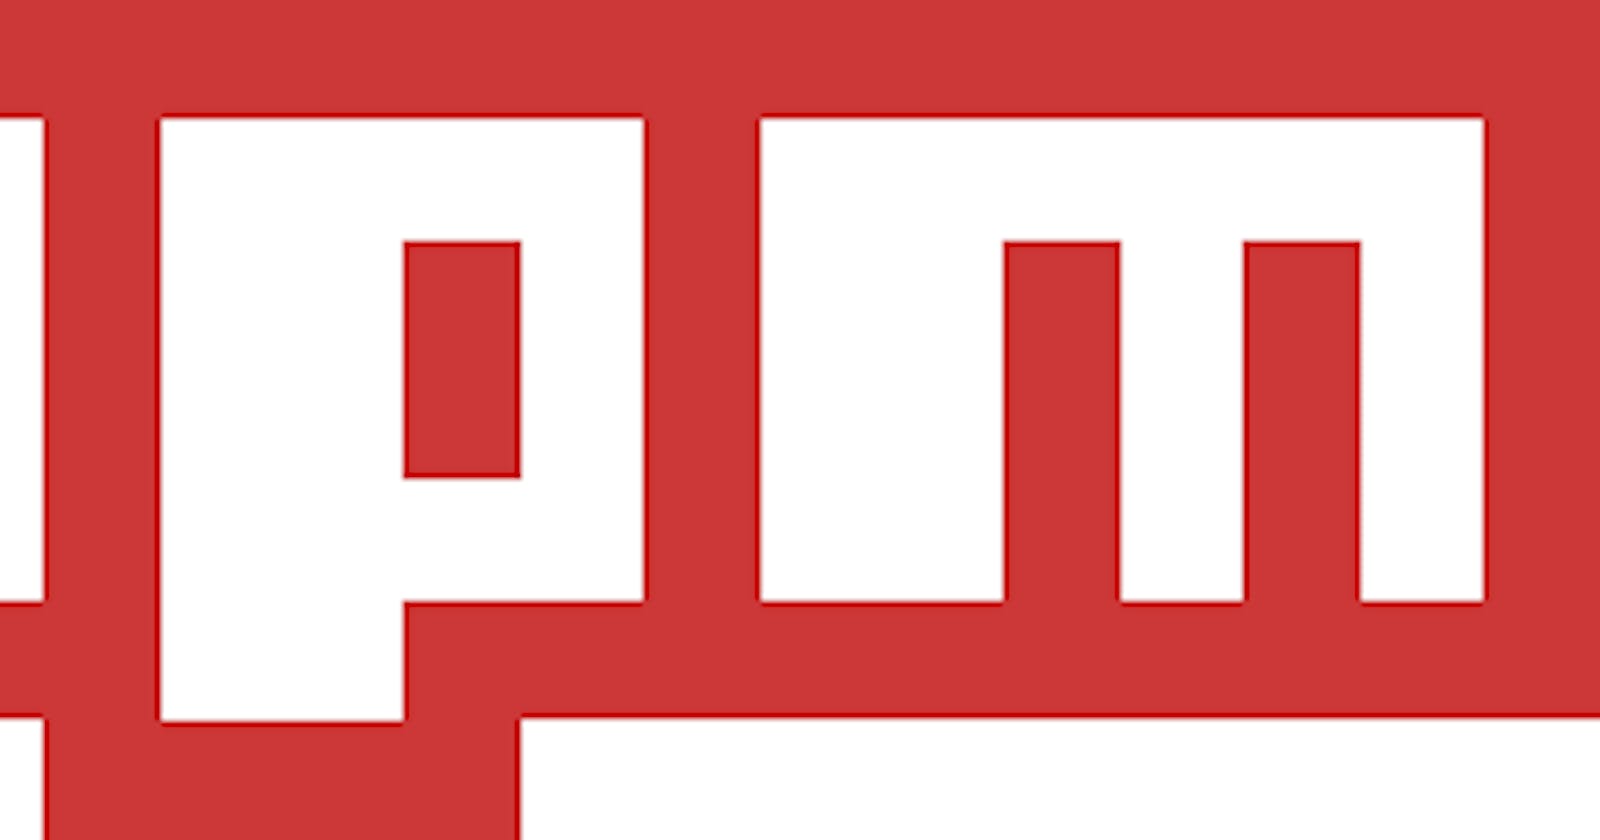 Installing npm dependencies from cloned projects